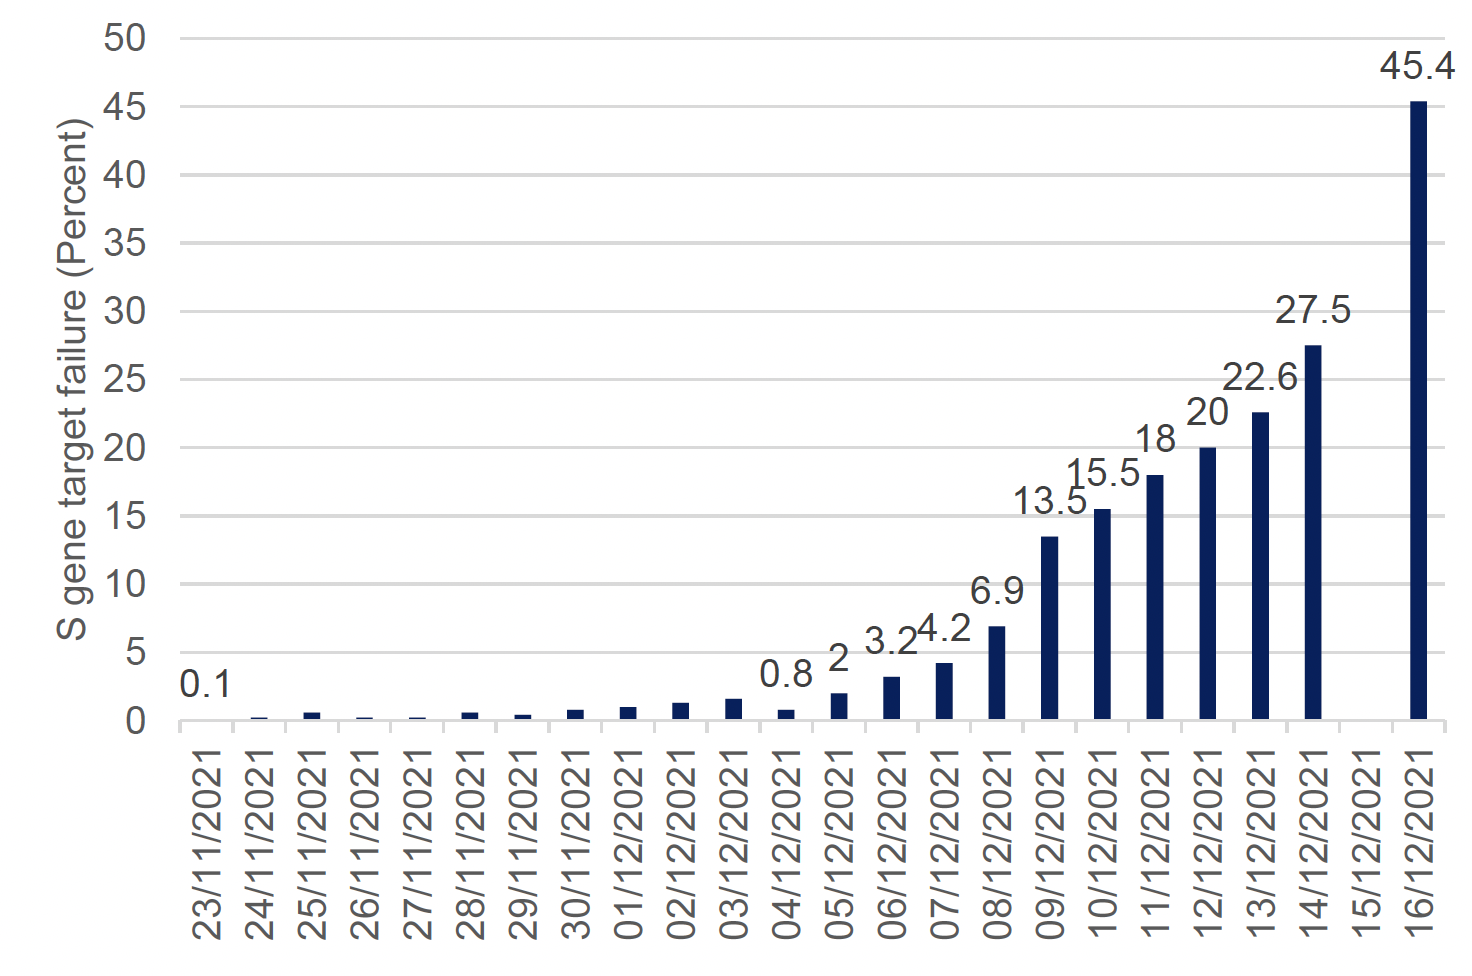 This column chart shows the percentage of positive cases going through the Pillar 2 Lighthouse lab that have the S gene target failure (SGTF) used to identify the Omicron variant, for each day since 23 November 2021. The proportion of SGTF cases have increased exponentially over this time period, from 0.1% on 23 November to 45.4% on 16 December.